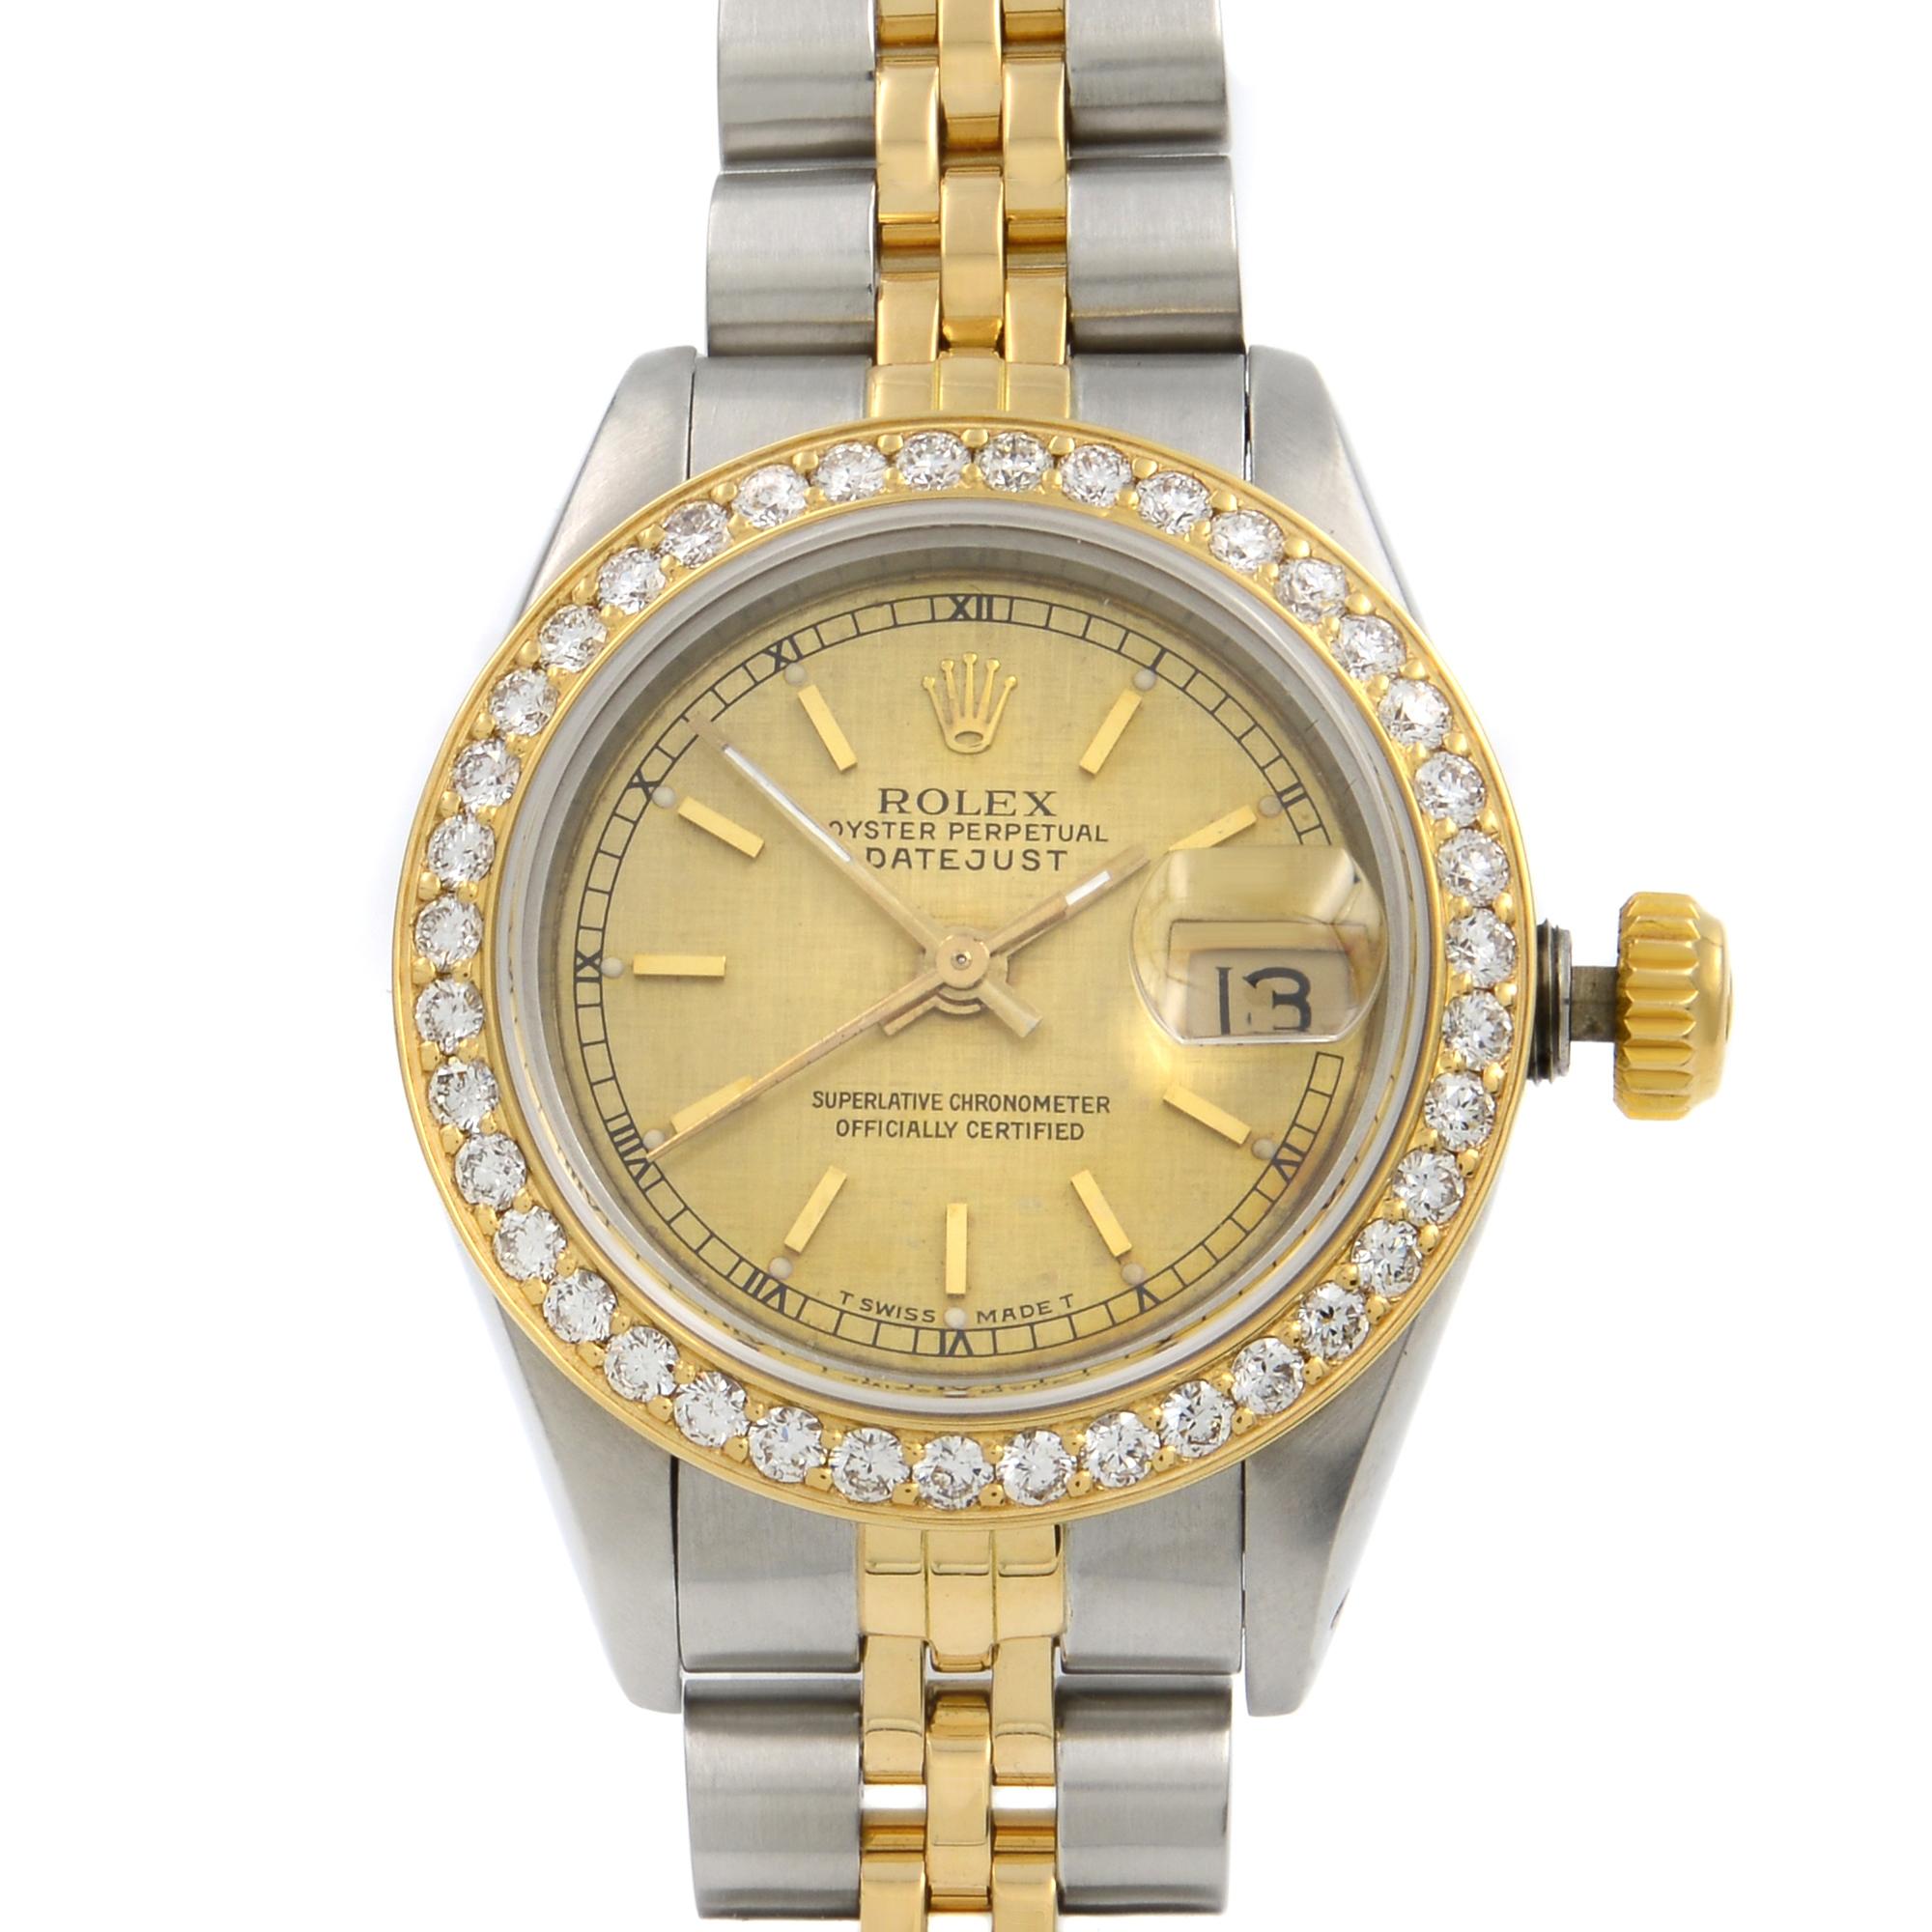 Custom Diamond Bezel. 1-carat Diamond Bezel.  Rolex Engraving on the back case.  Comes without manufacturer's box and papers. Covered by a 1-year Chronostore warranty.
Details:
Model Number 69173
Brand Rolex
Department Women
Style Classic,